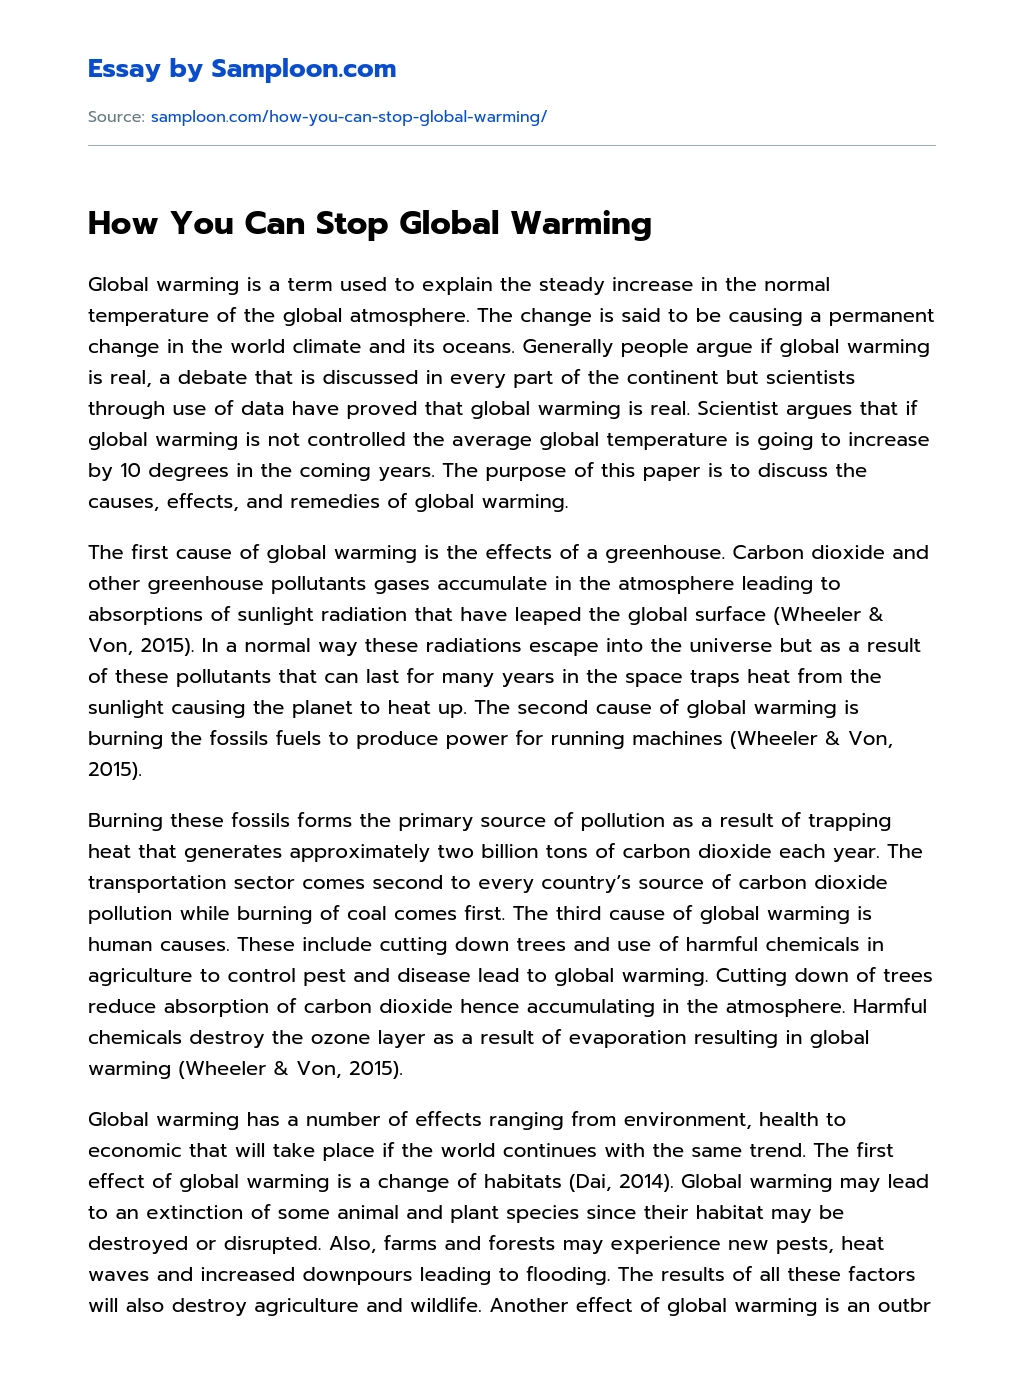 How You Can Stop Global Warming essay